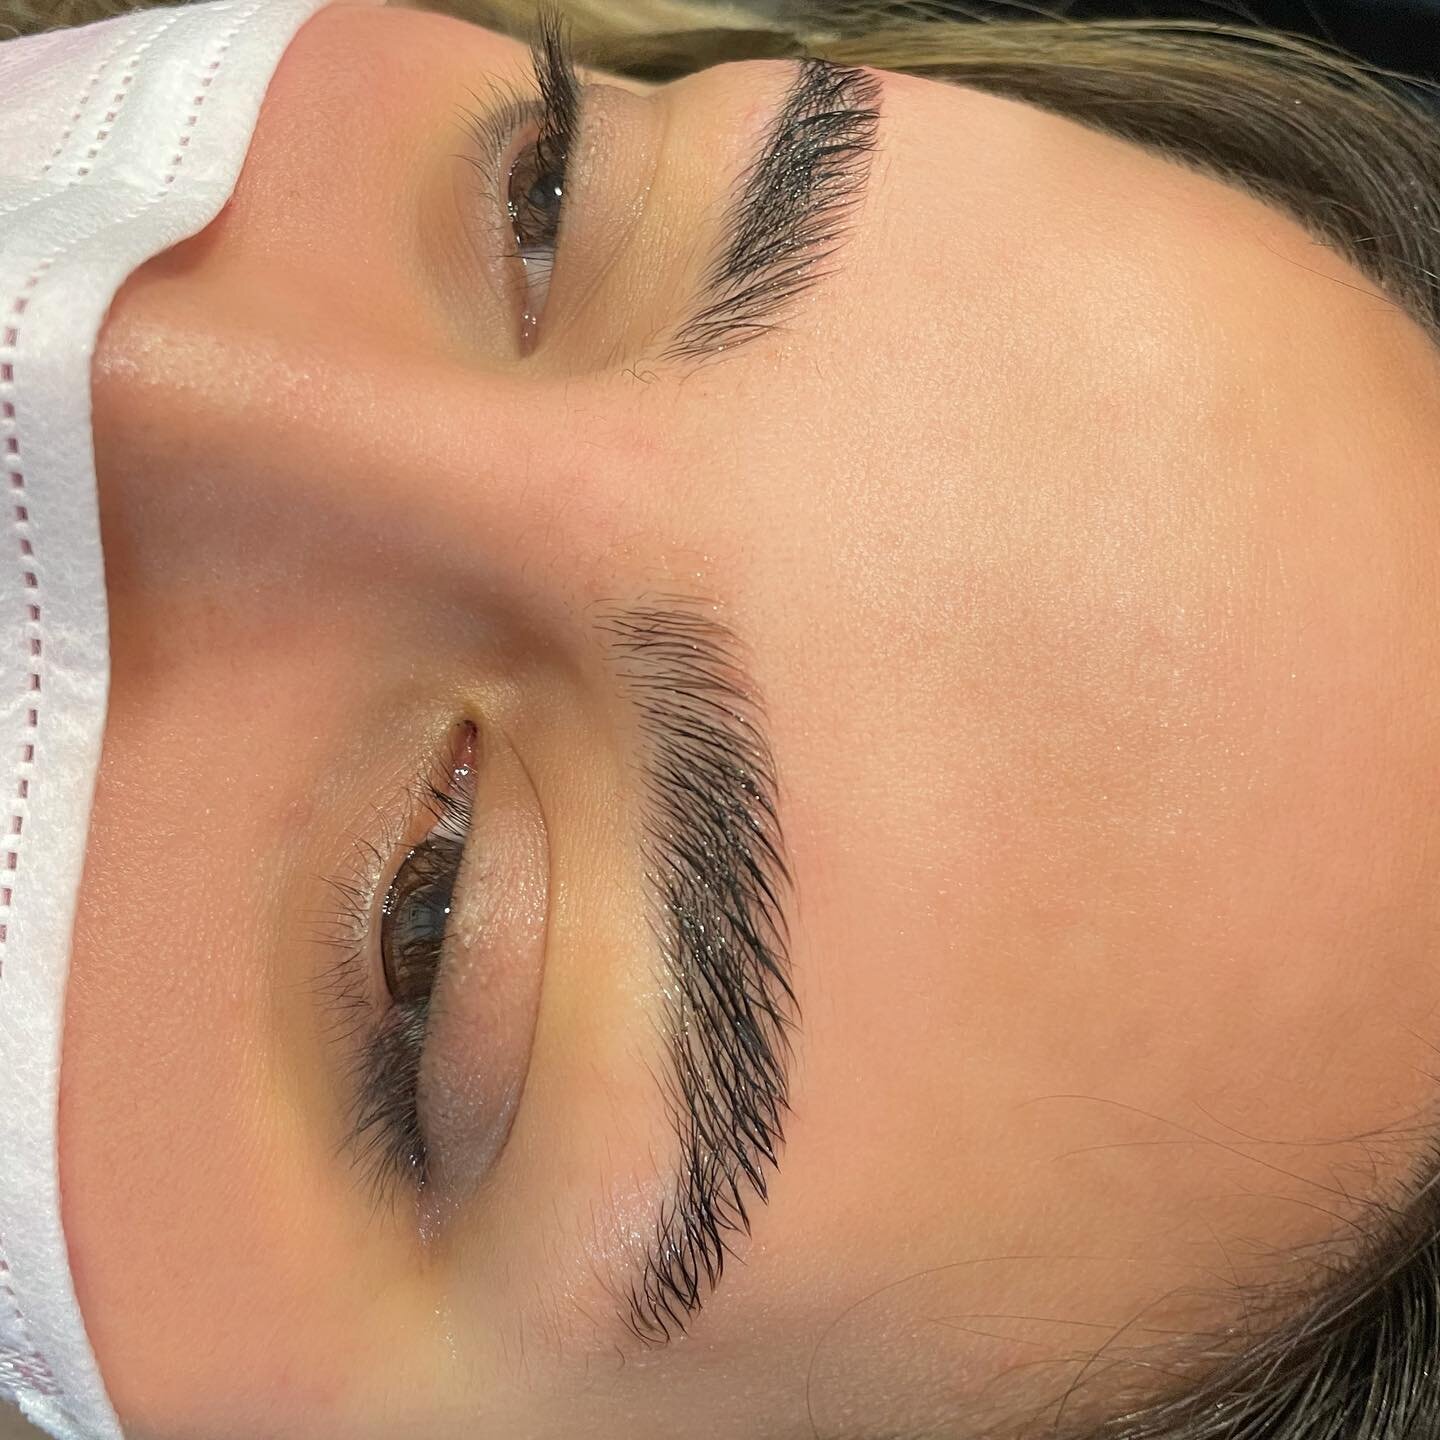 ✨Brow lamination✨
Looking for a fuller brow with our the permanent commitment? If so this is for you!  Message me for details 
#browlamination #browshaping #elpasobrows #browlaminationelpaso